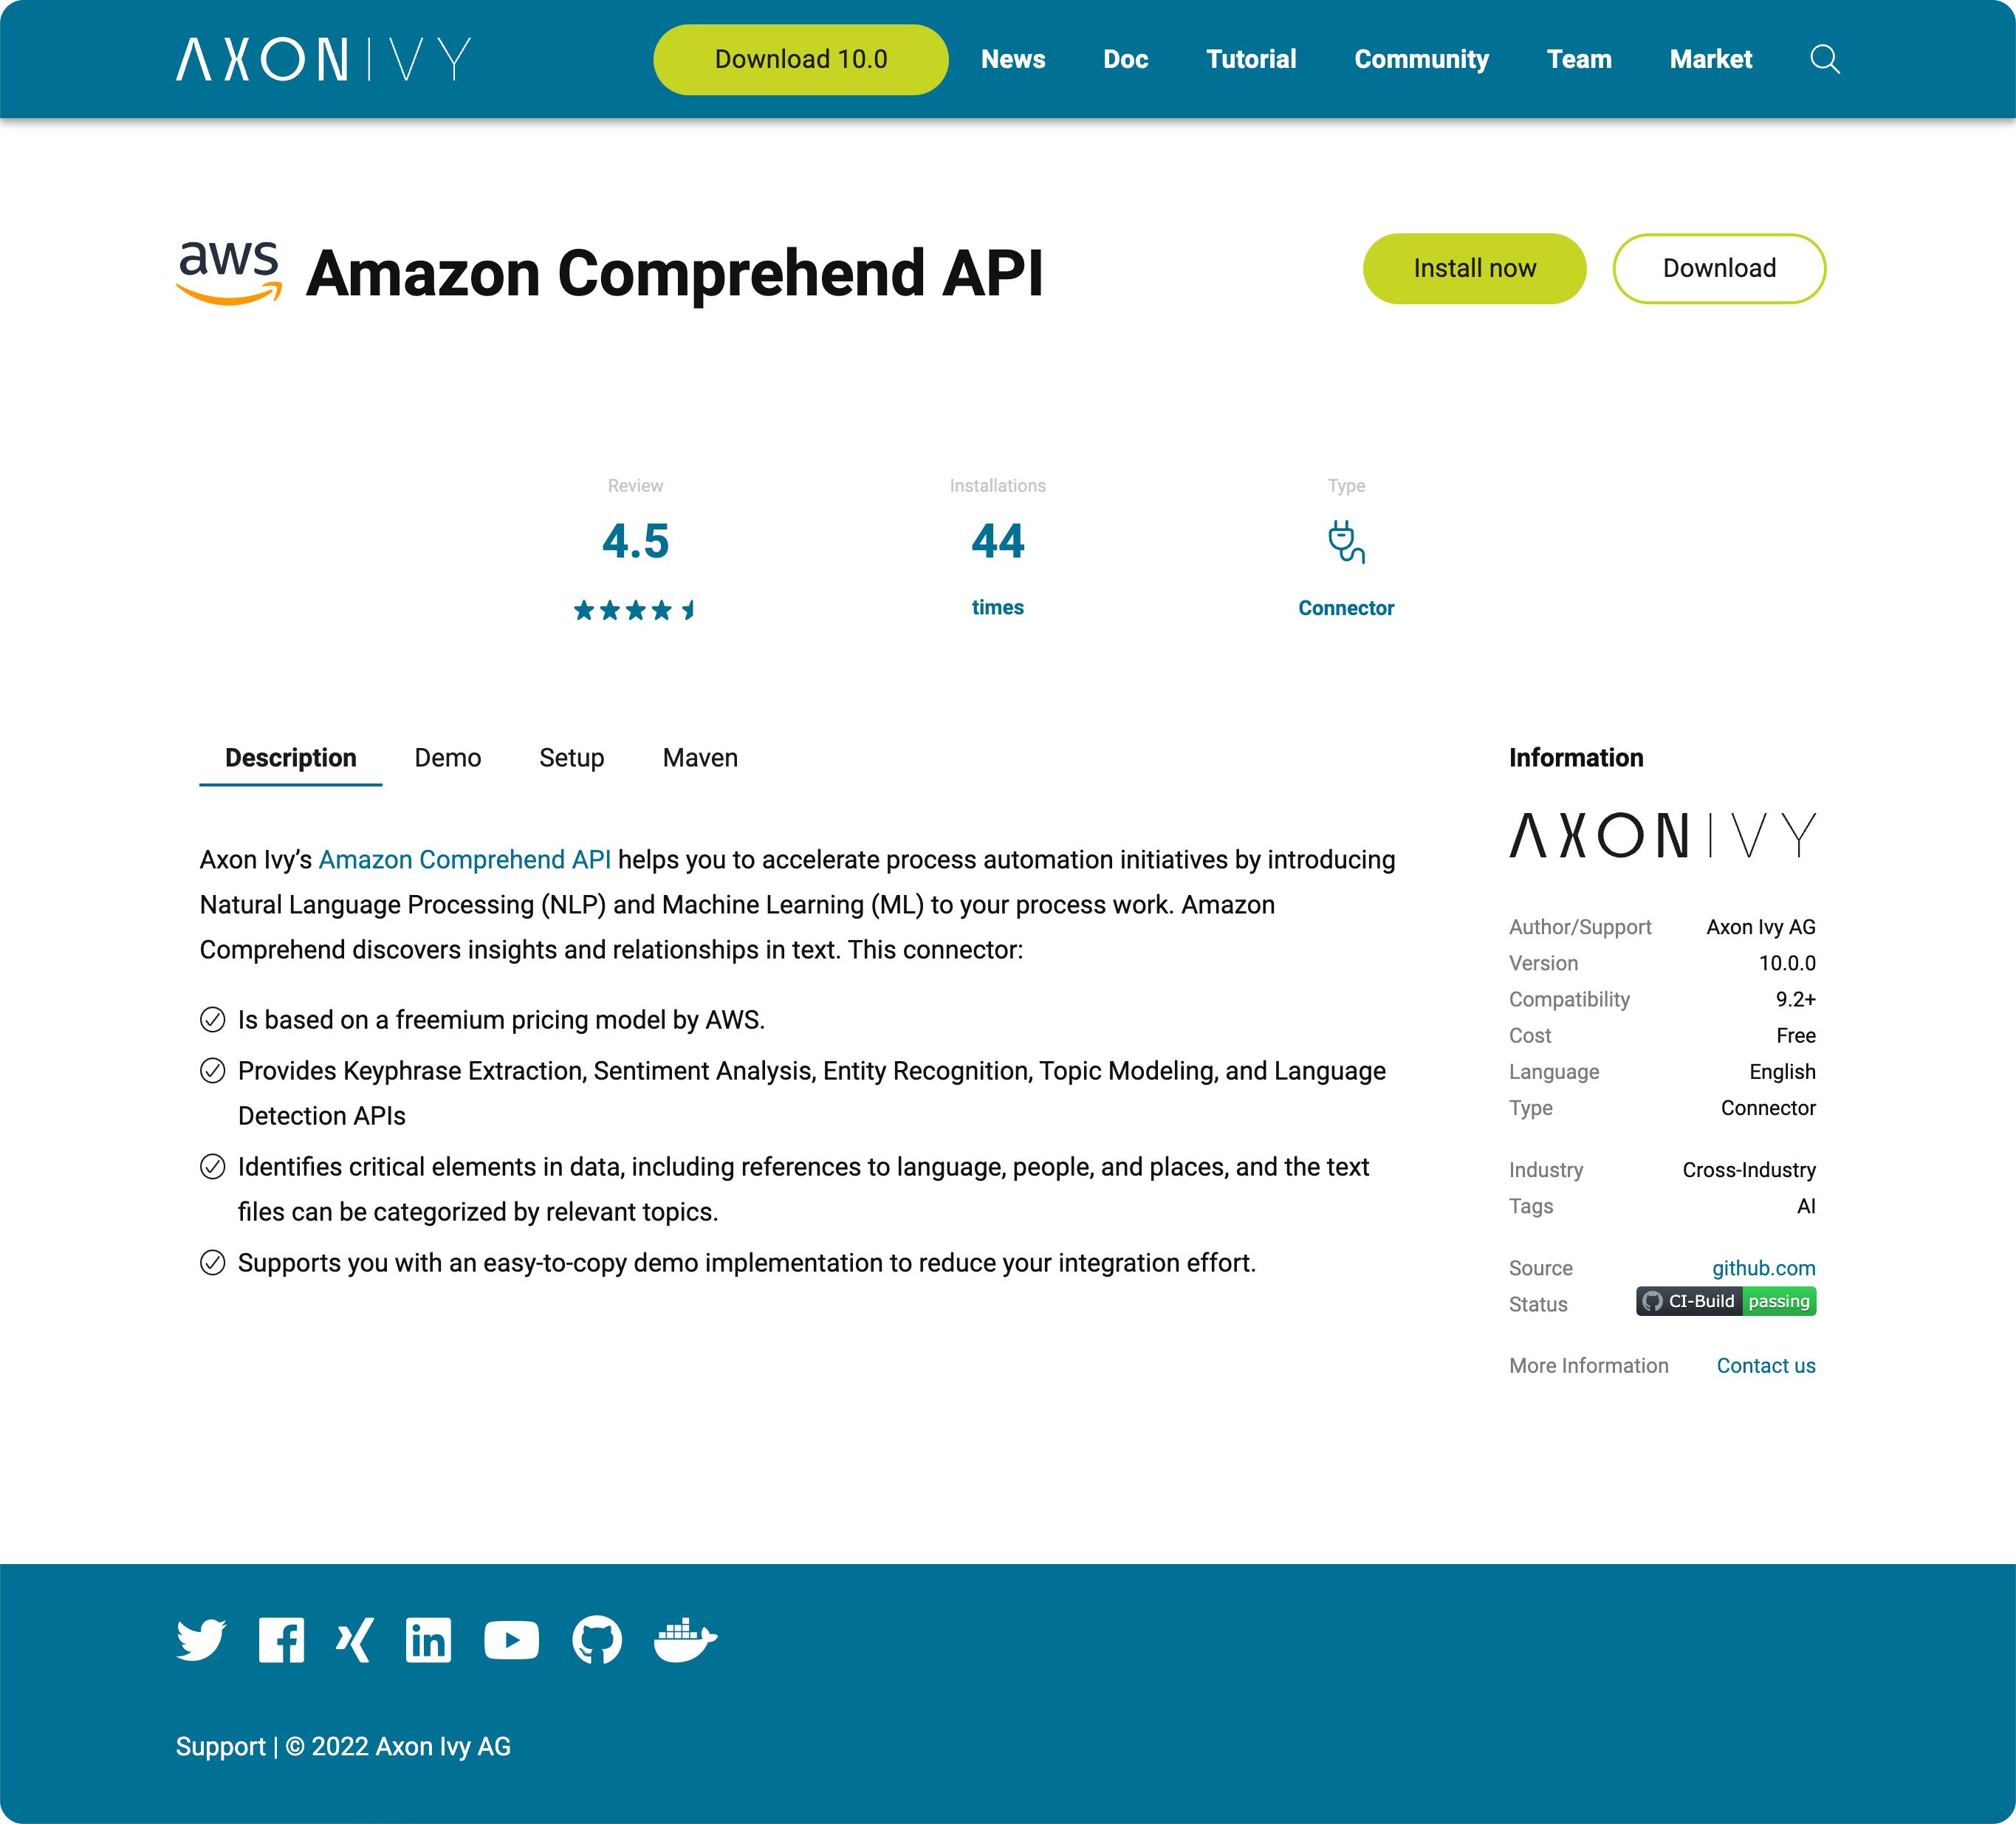 Axon Ivy Market with Amazon services.